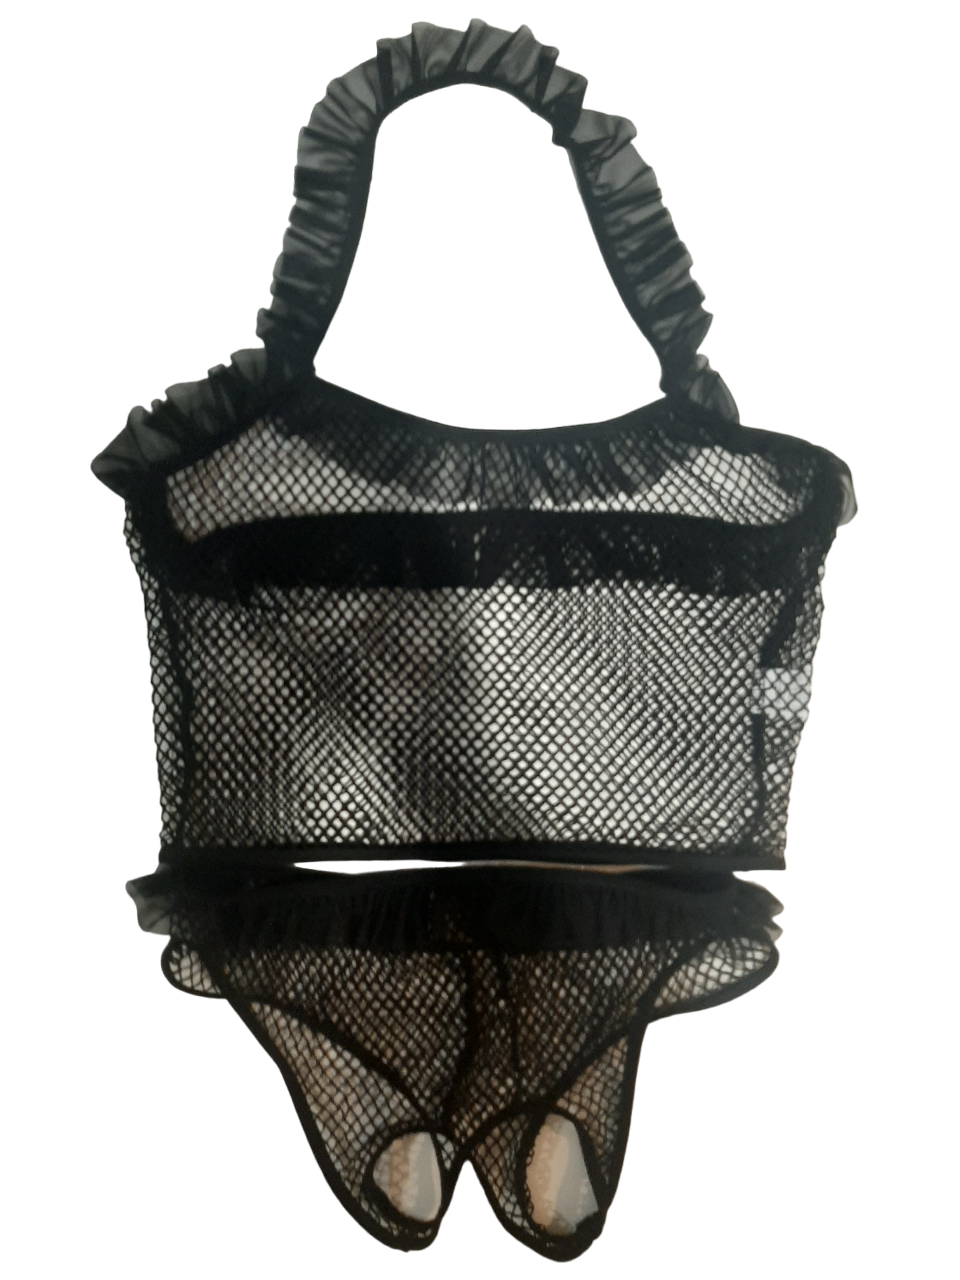 Sexy Fishnet Outfit with Chiffon & Crotchless Panty - ONE SIZE